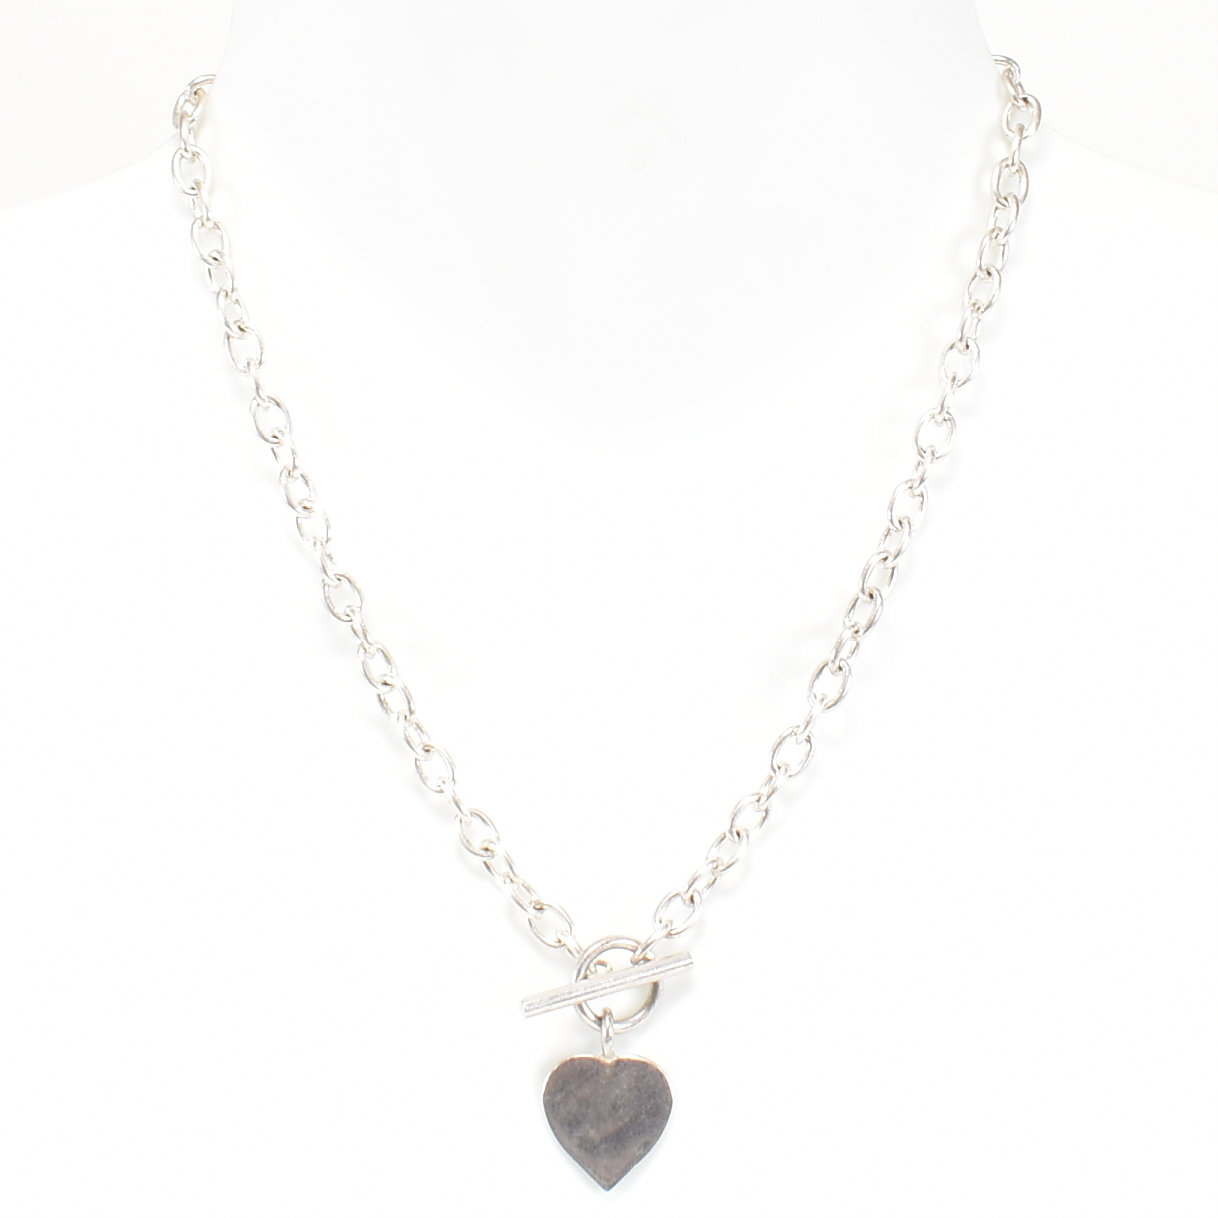 HALLMARKED SILVER T BAR CHAIN & HEART TAG PENDANT - Image 3 of 5